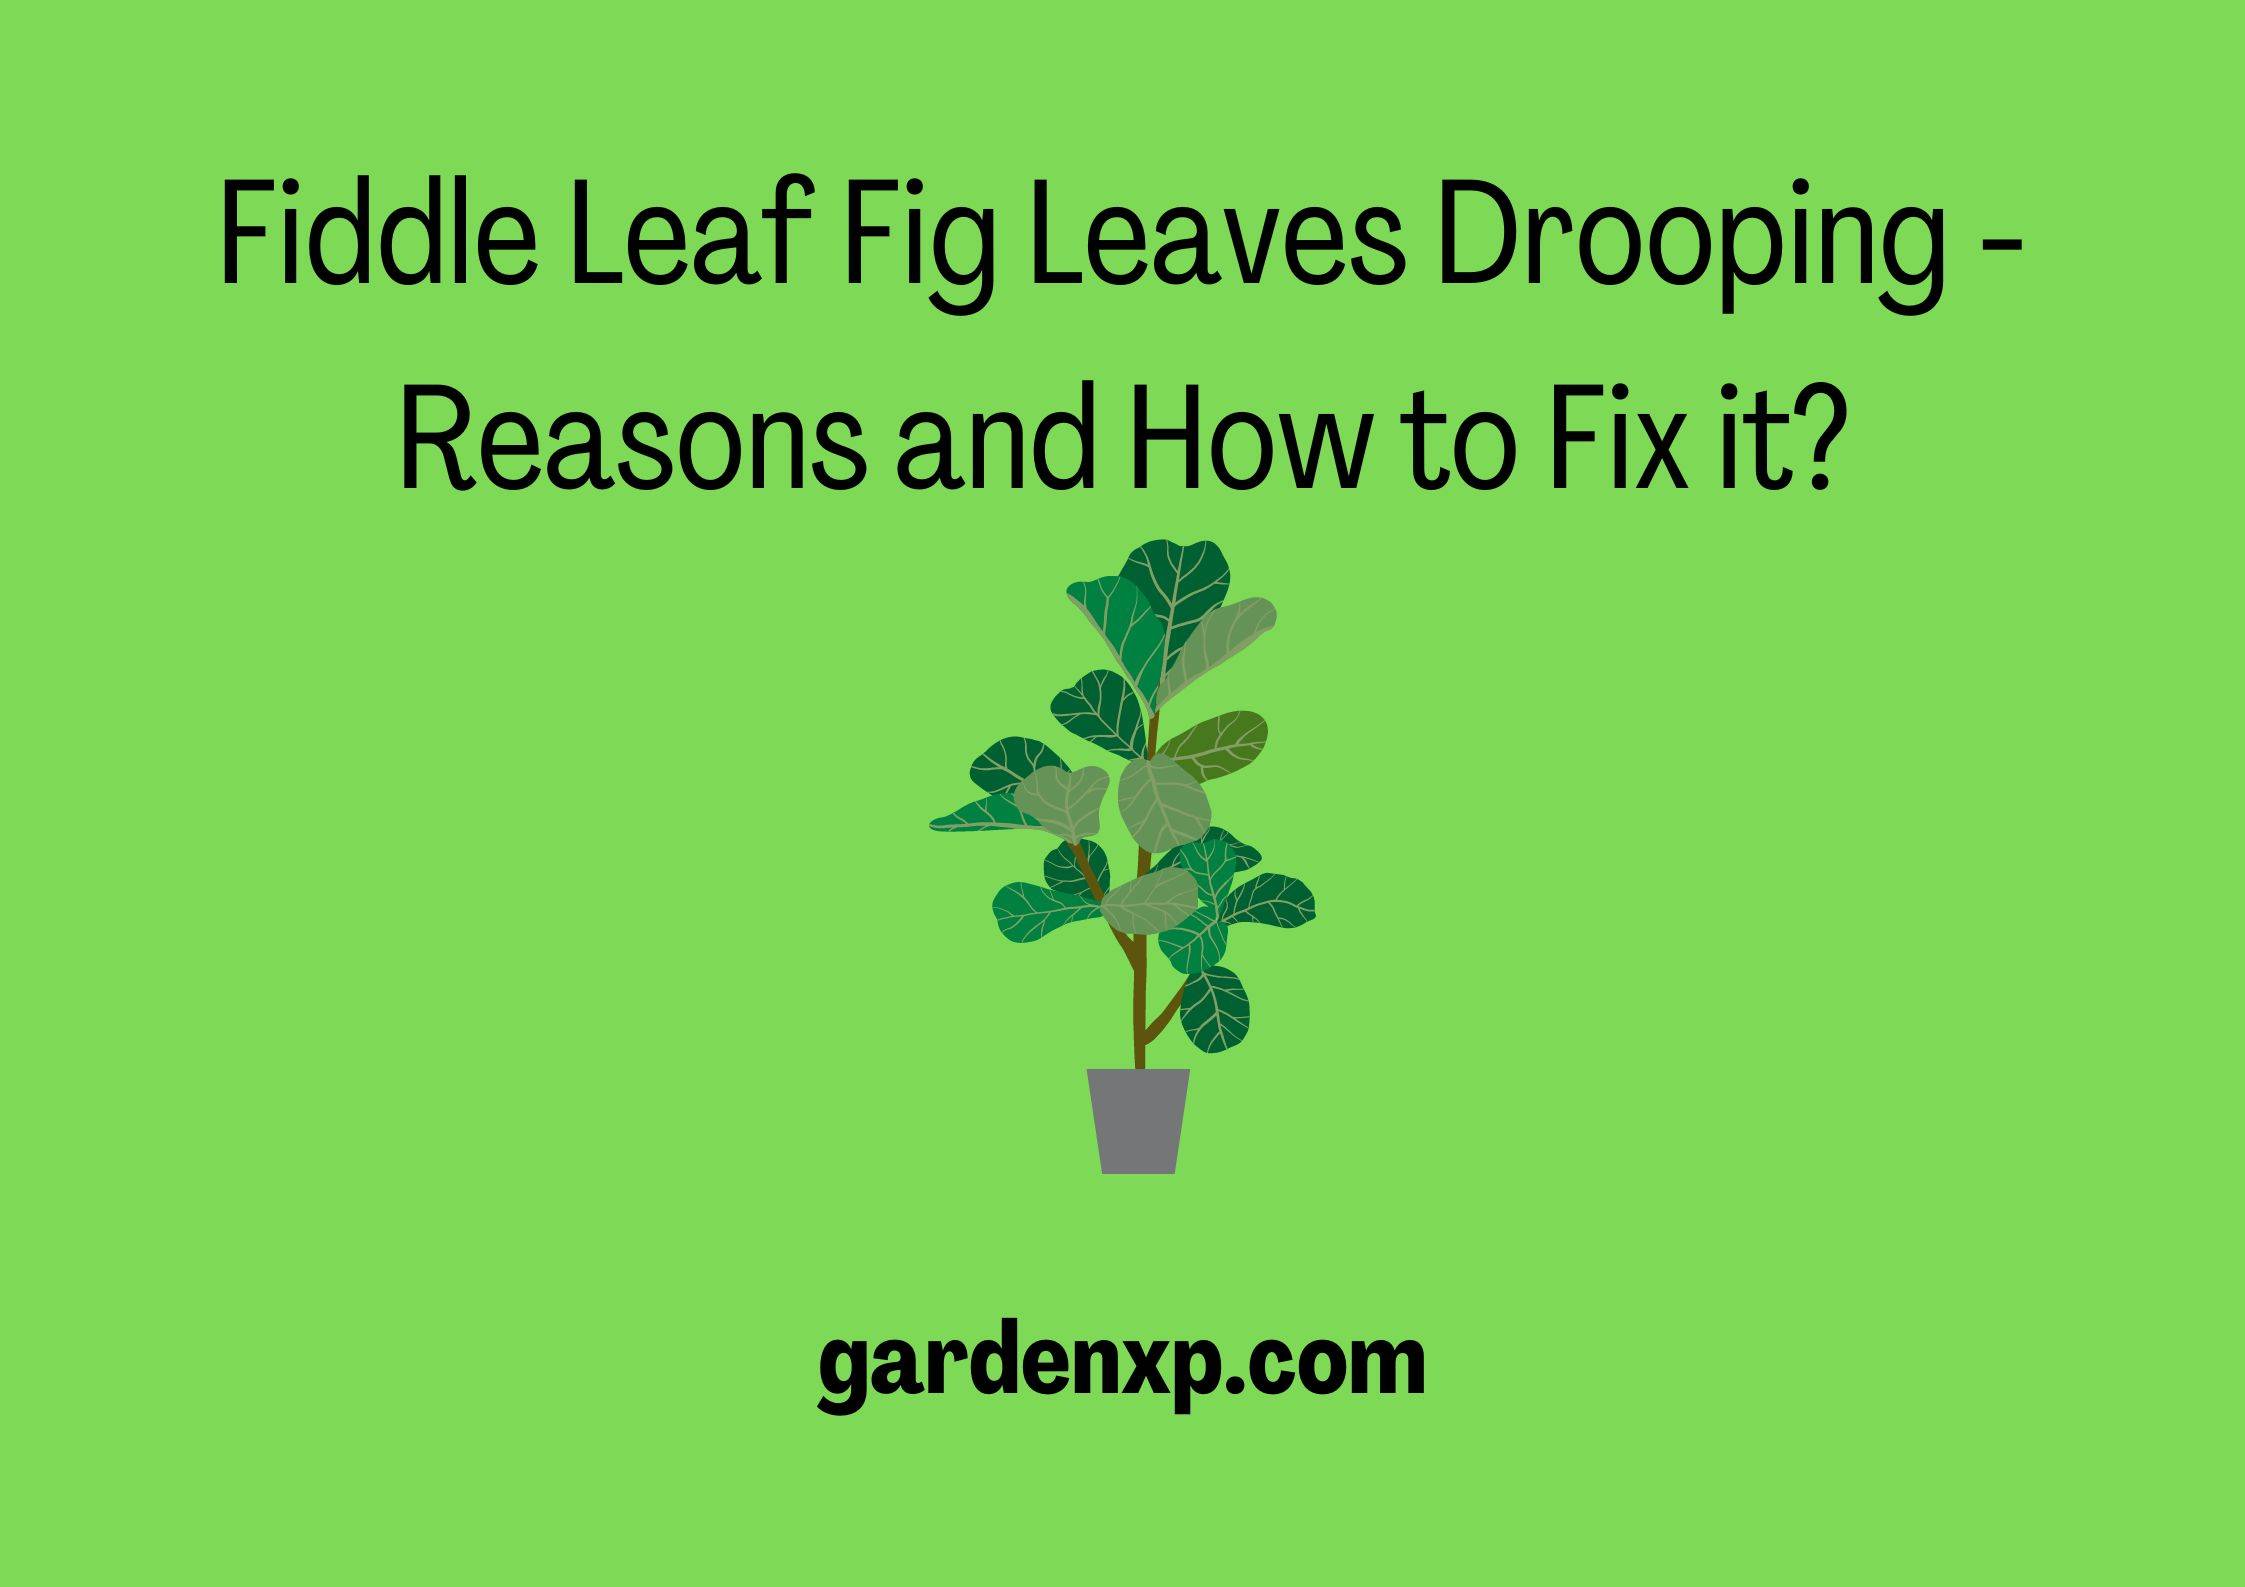 Fiddle Leaf Fig Leaves Drooping - Reasons and How to Fix it?